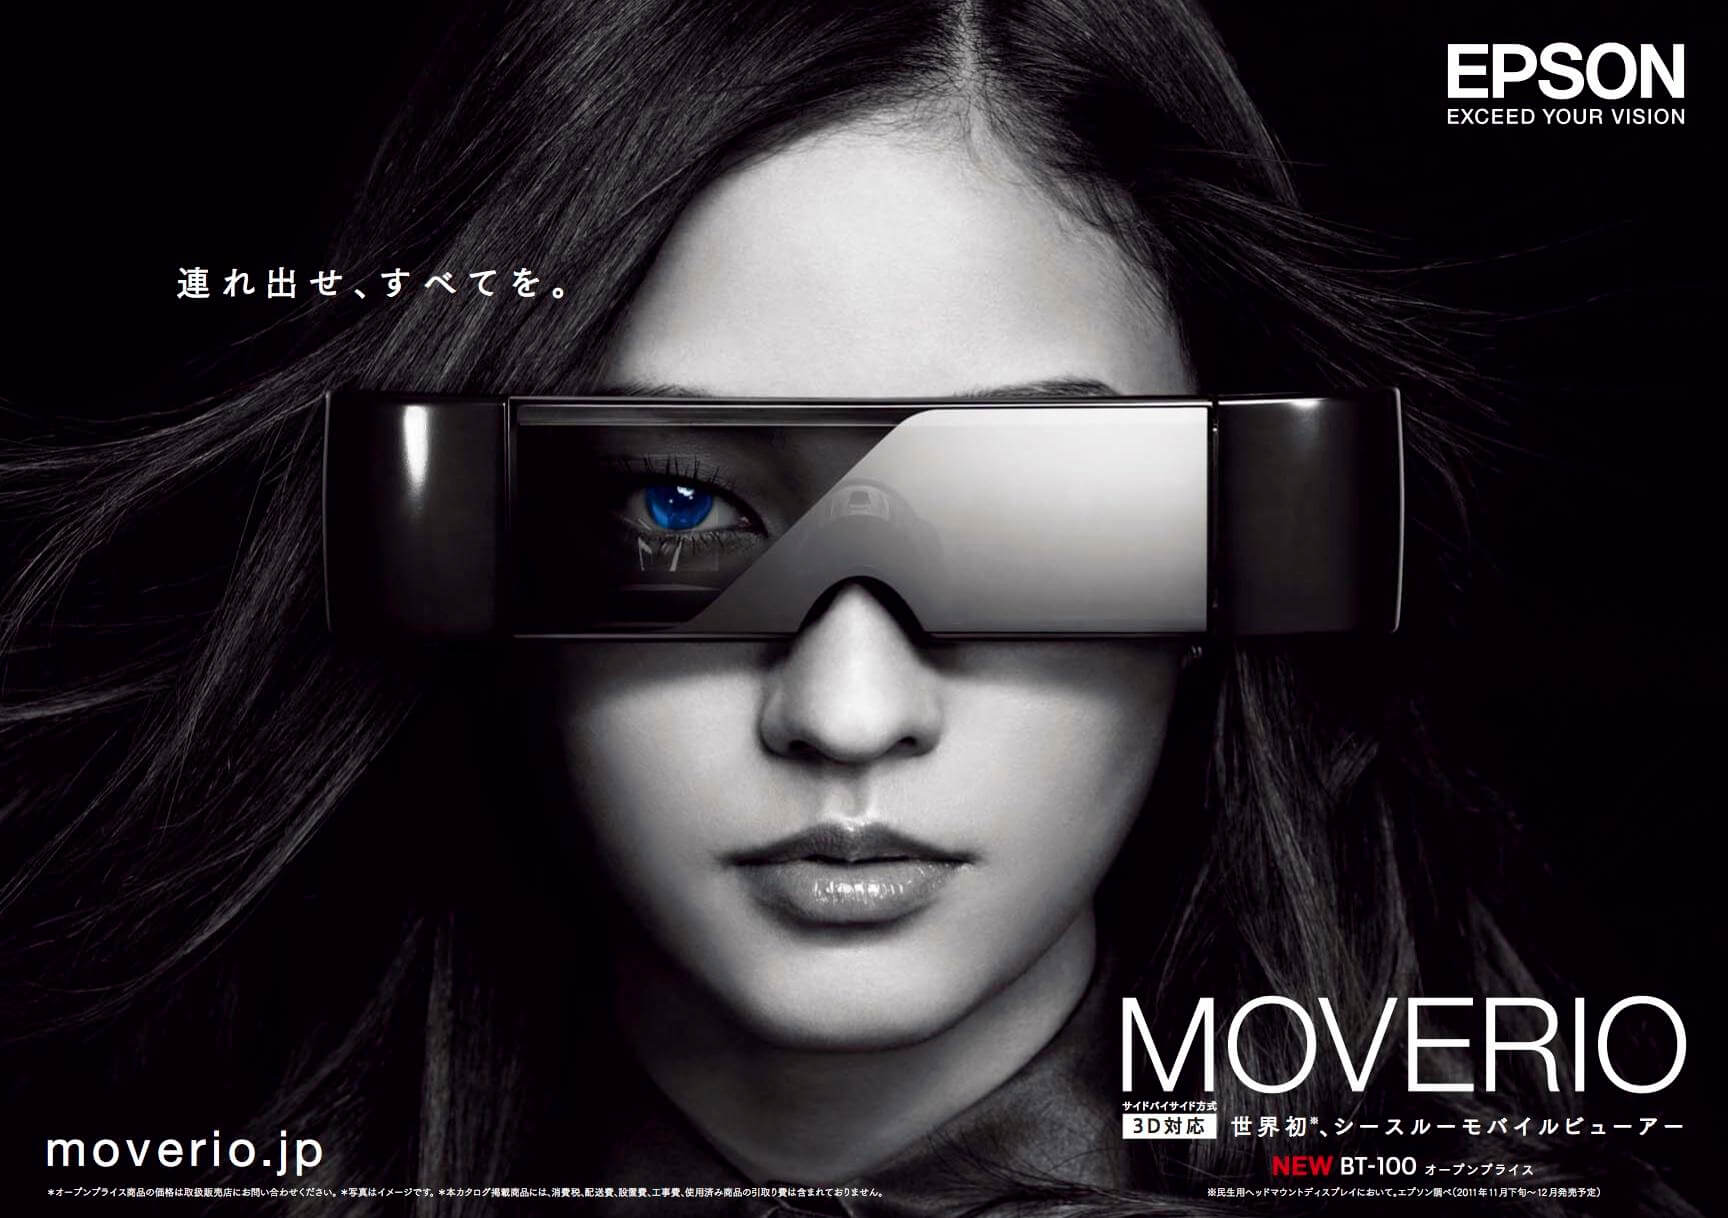 epson moverio bt-100 android